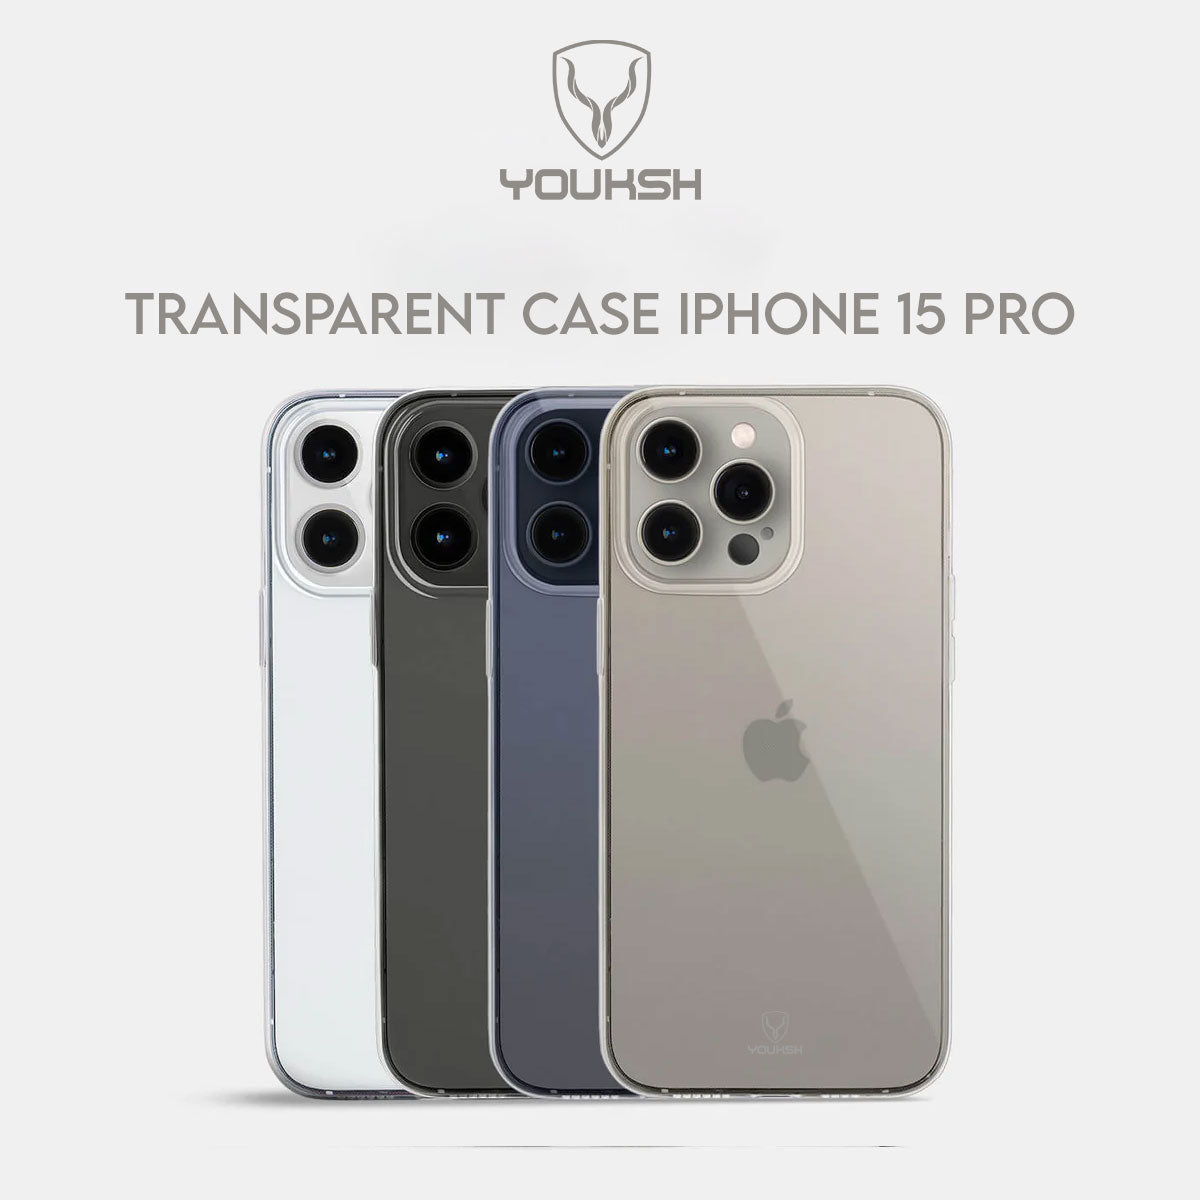 YOUSKH APPLE IPHONE 15 PRO (6.1) TRANSPARENT CASE - YOUKSH APPLE IPHONE 15 PRO (6.1) TRANSPARENT COVER - TRANSPARENT SOFT SHOCK PROOF JELLY BACK COVER.